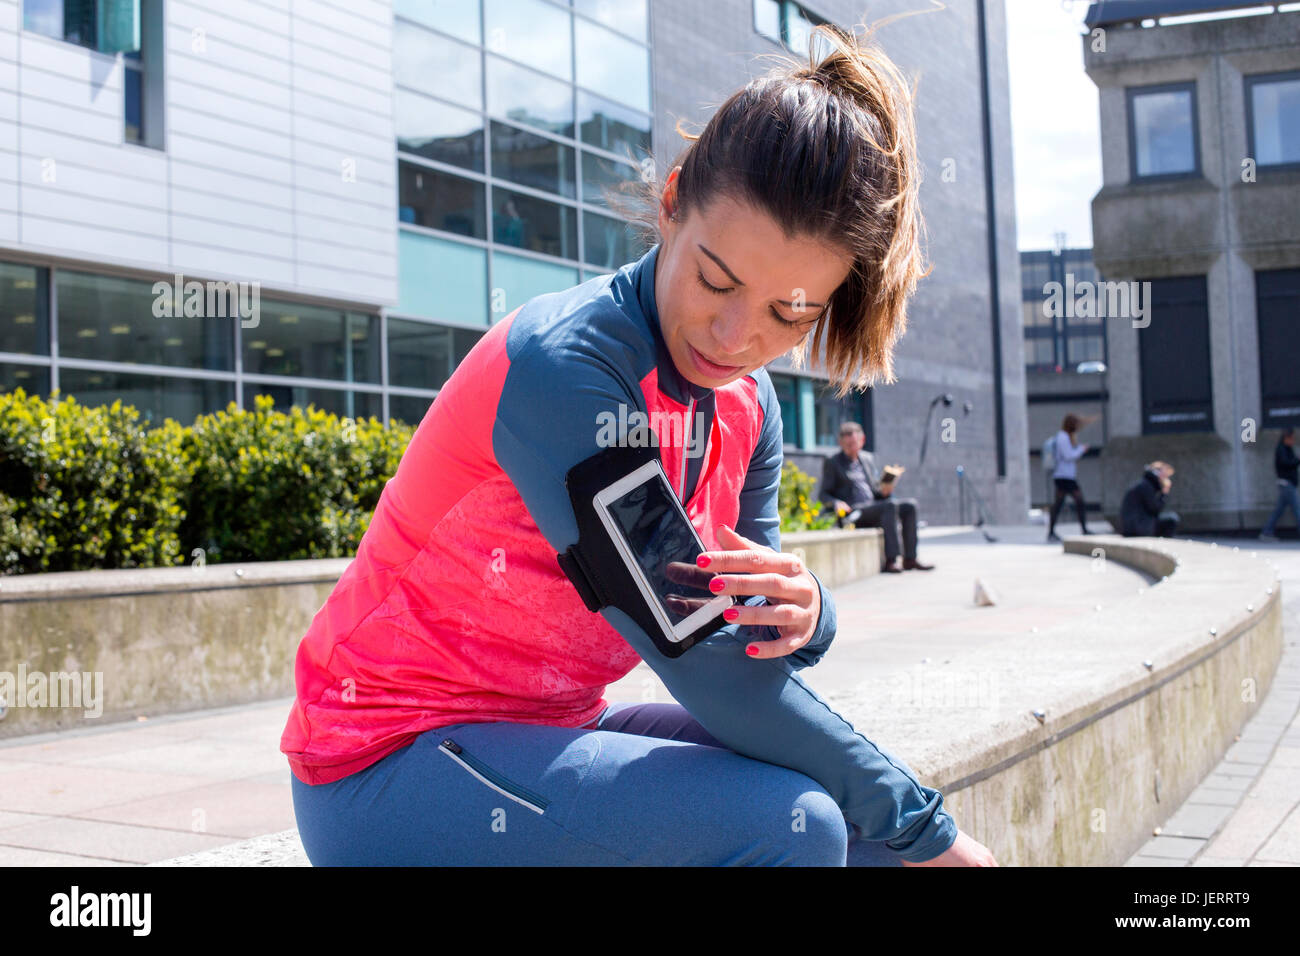 Woman taking a break from her run in the city. She is sitting on a wall and is using the smartphone that is in a strap round her arm. Stock Photo